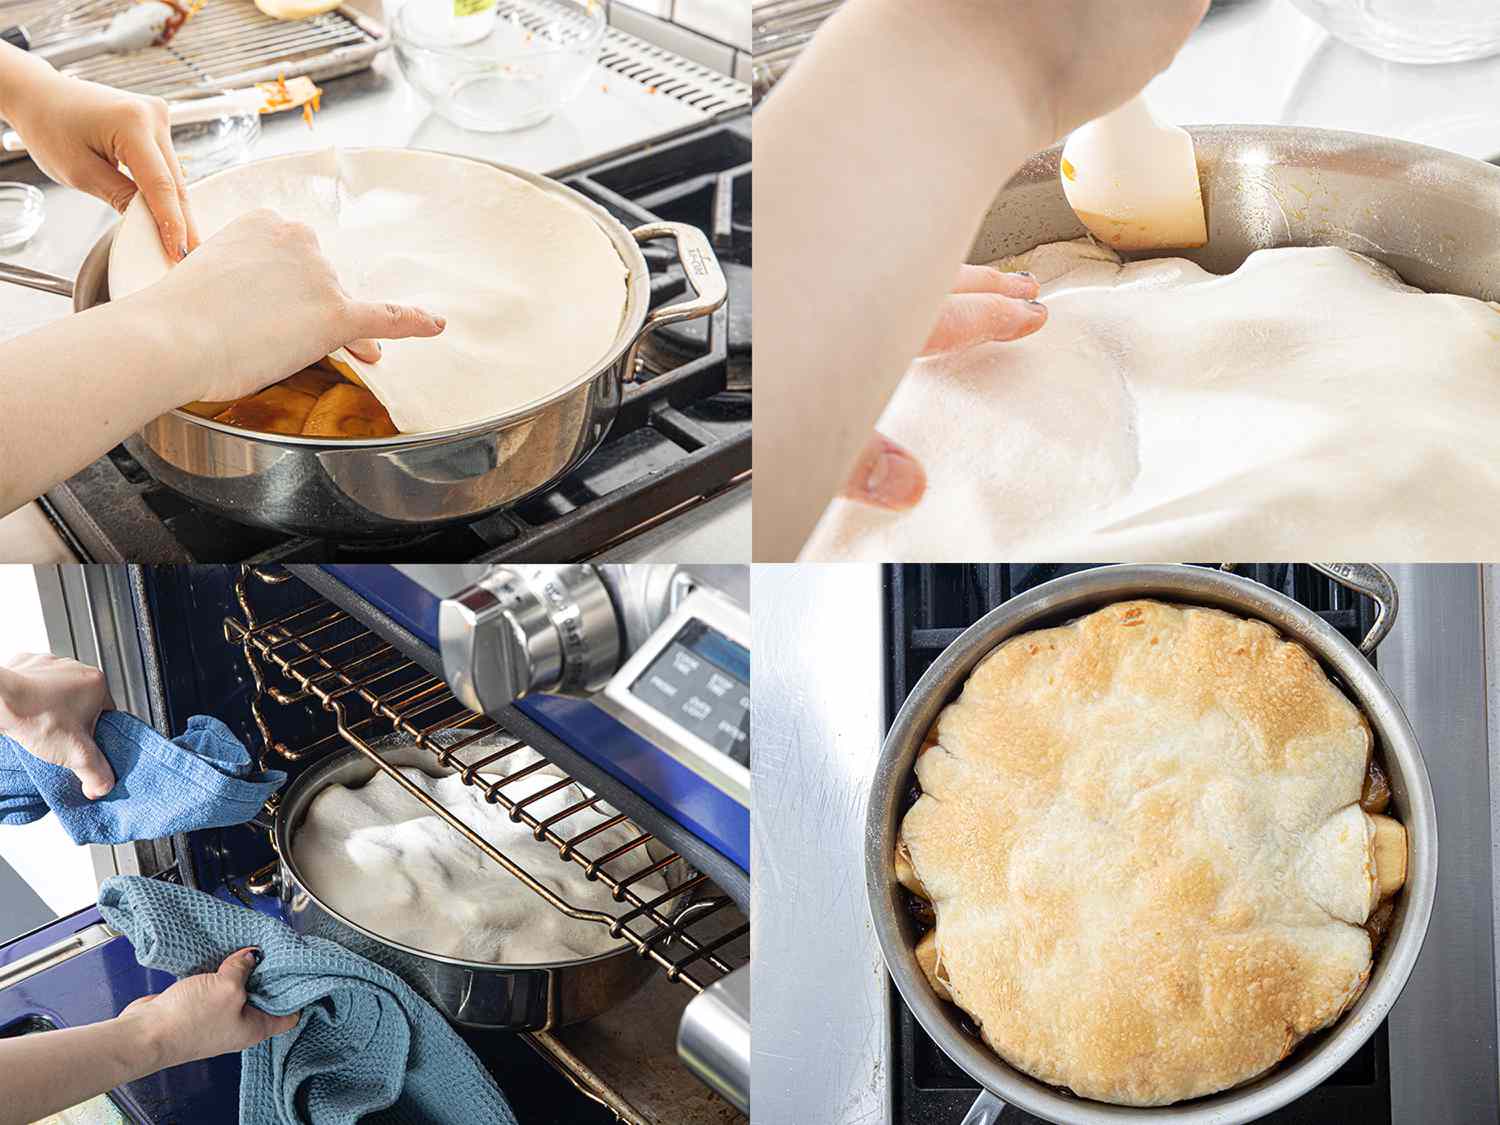 Four image collage of placing dough on apples, tucking dough into side of apples, placing it in the oven, and finished tarte tatin out of the oven, still in skillet